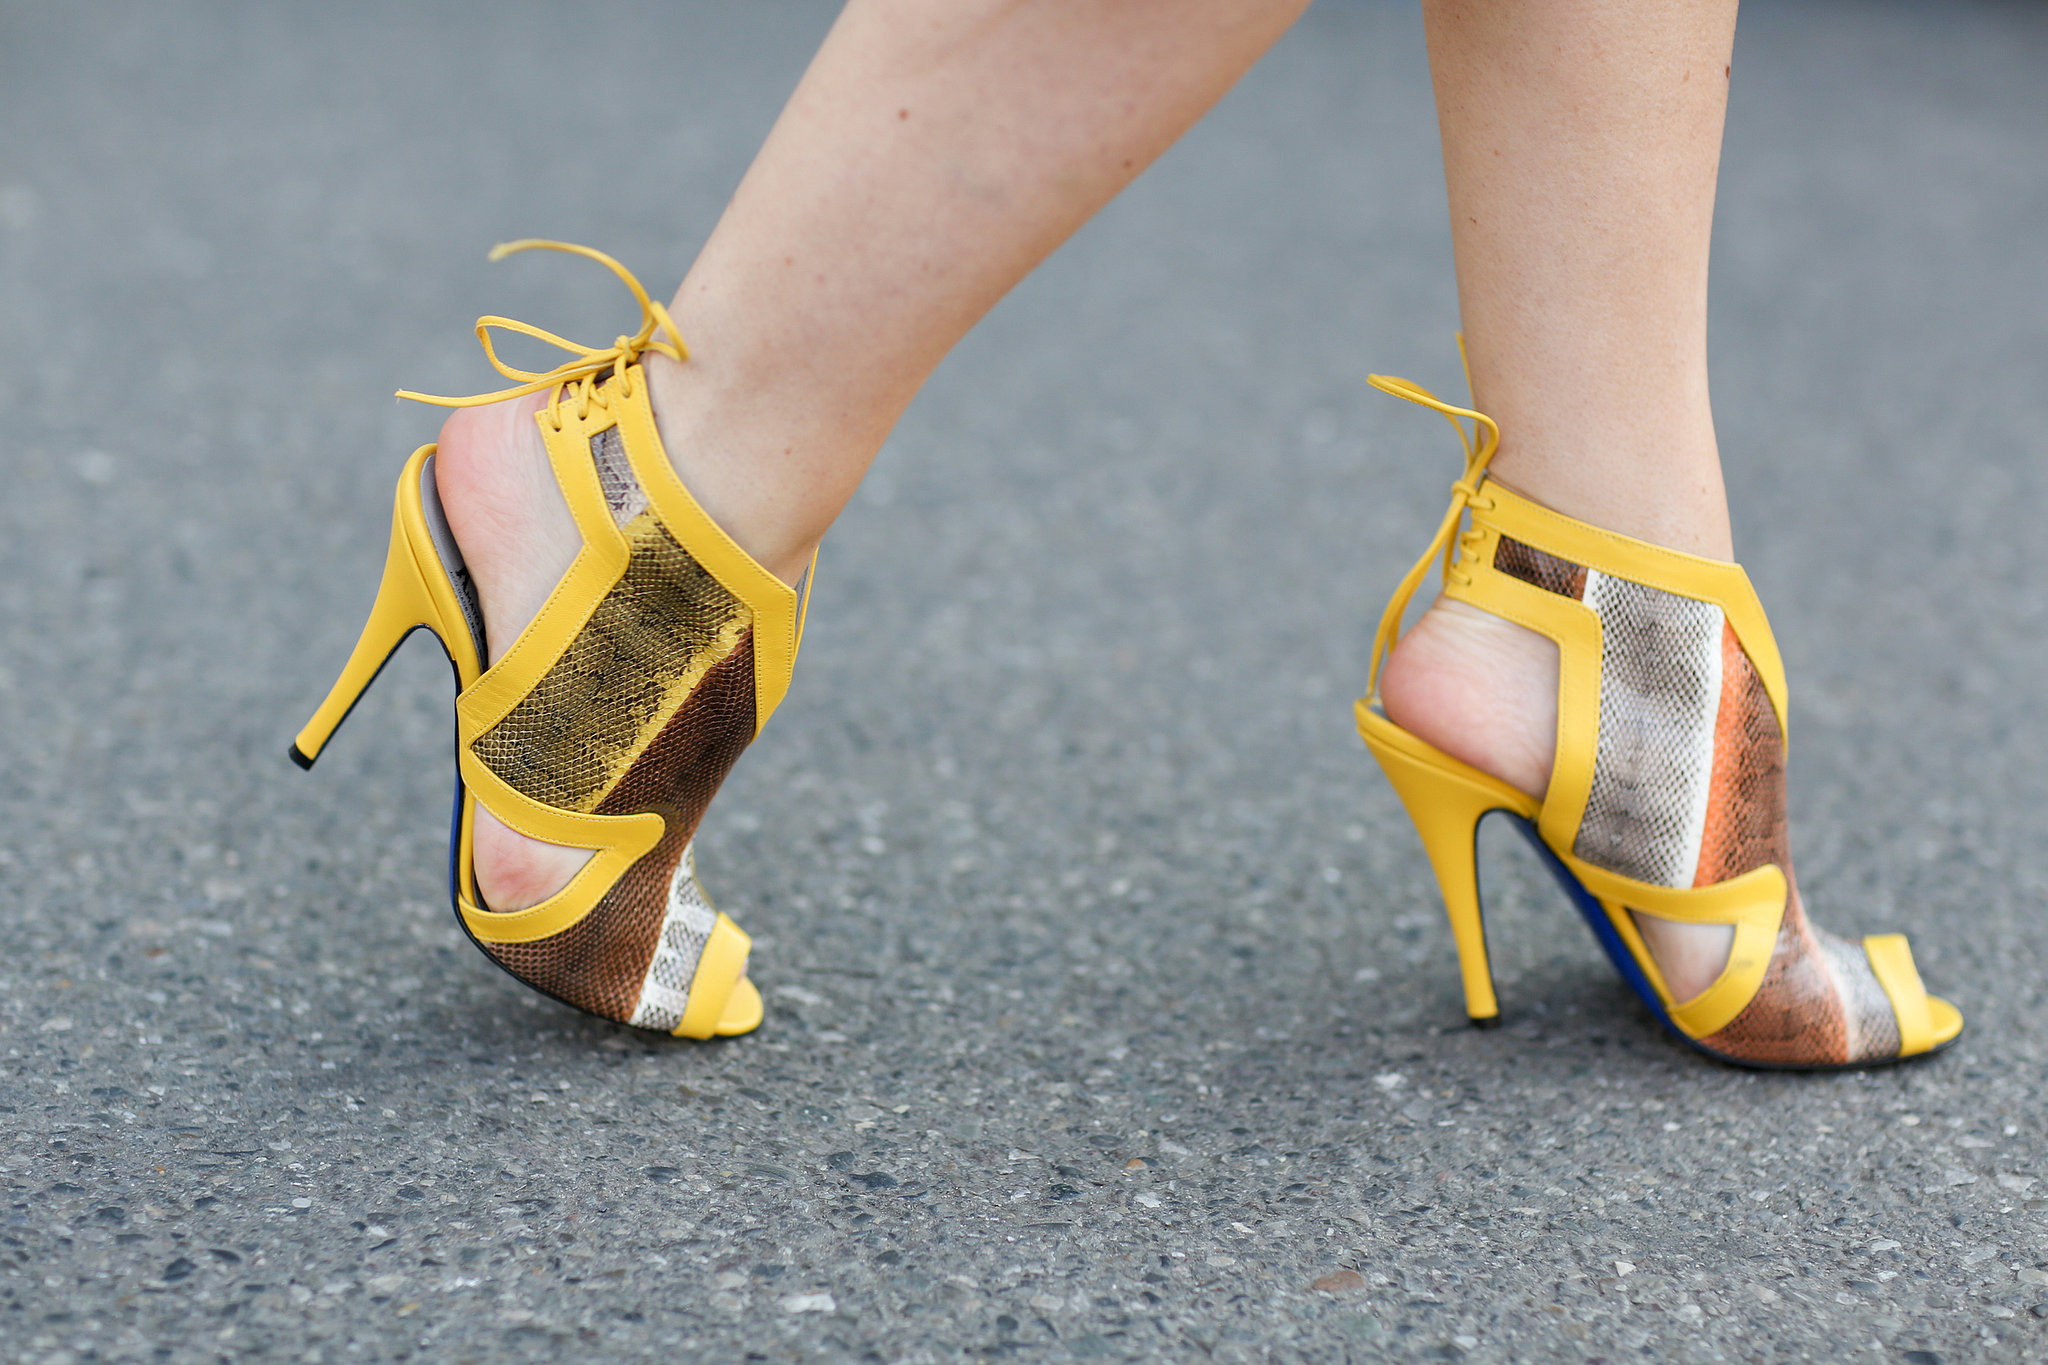 These heels could spice up any outfit. 
